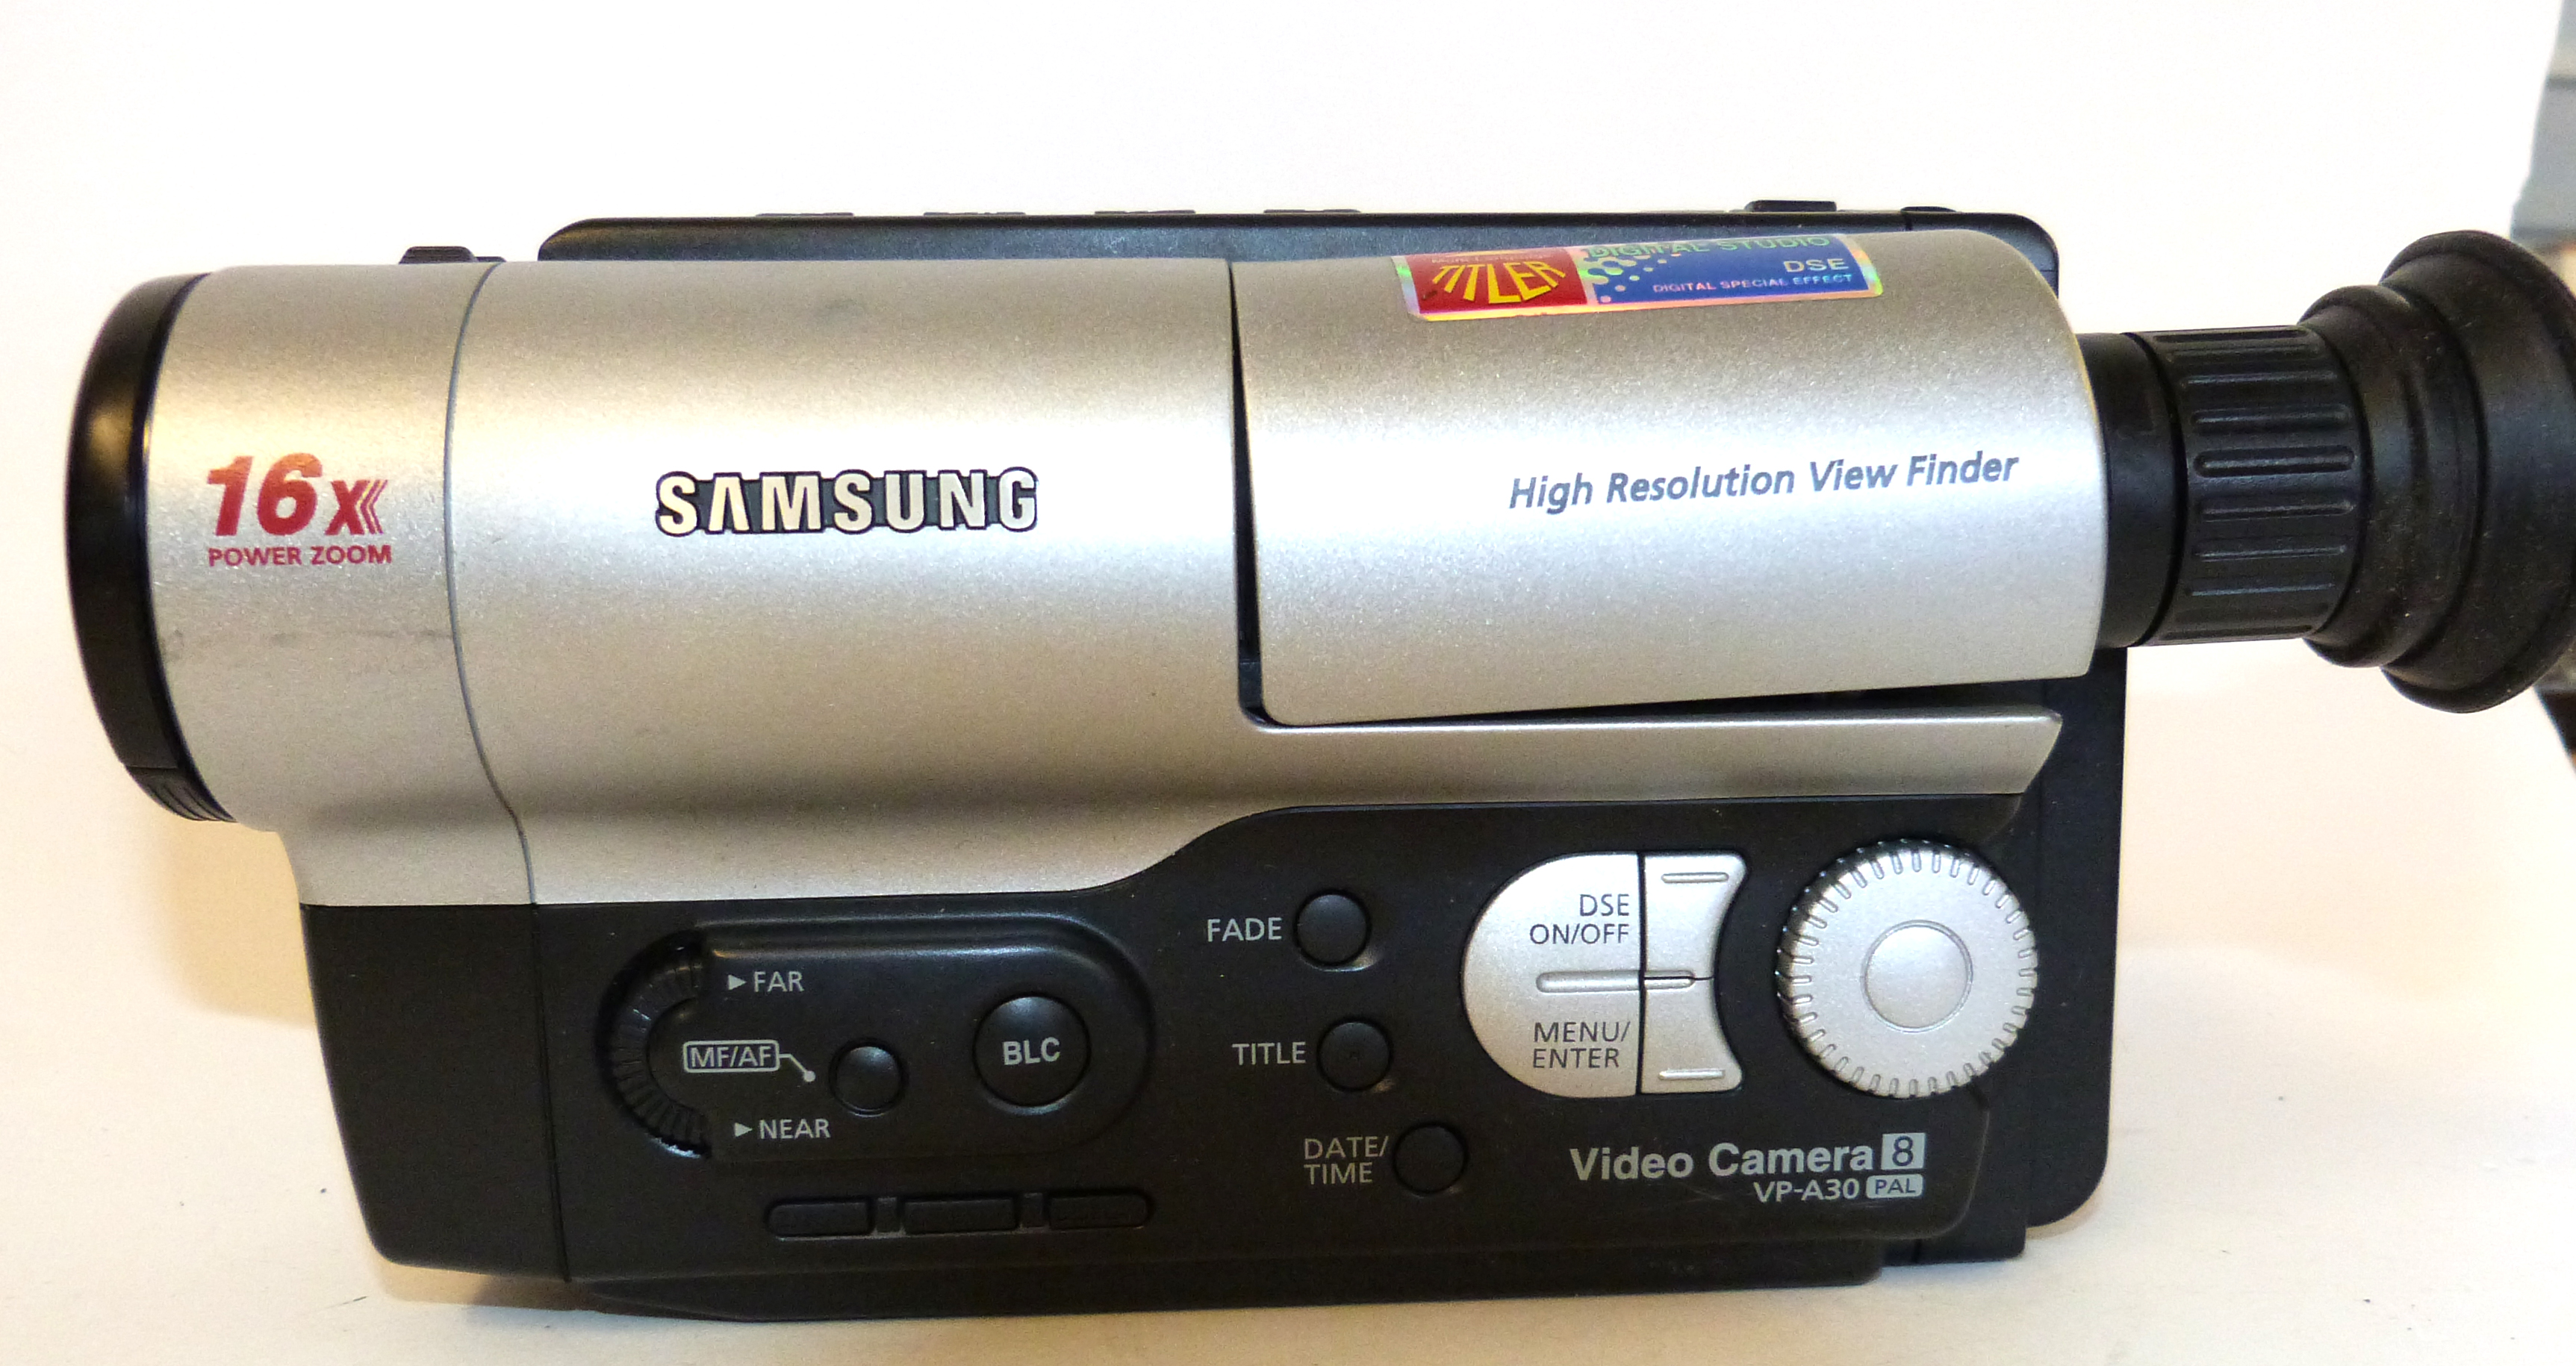 Samsung video camera VP-A30 with case and accessories - Image 2 of 6